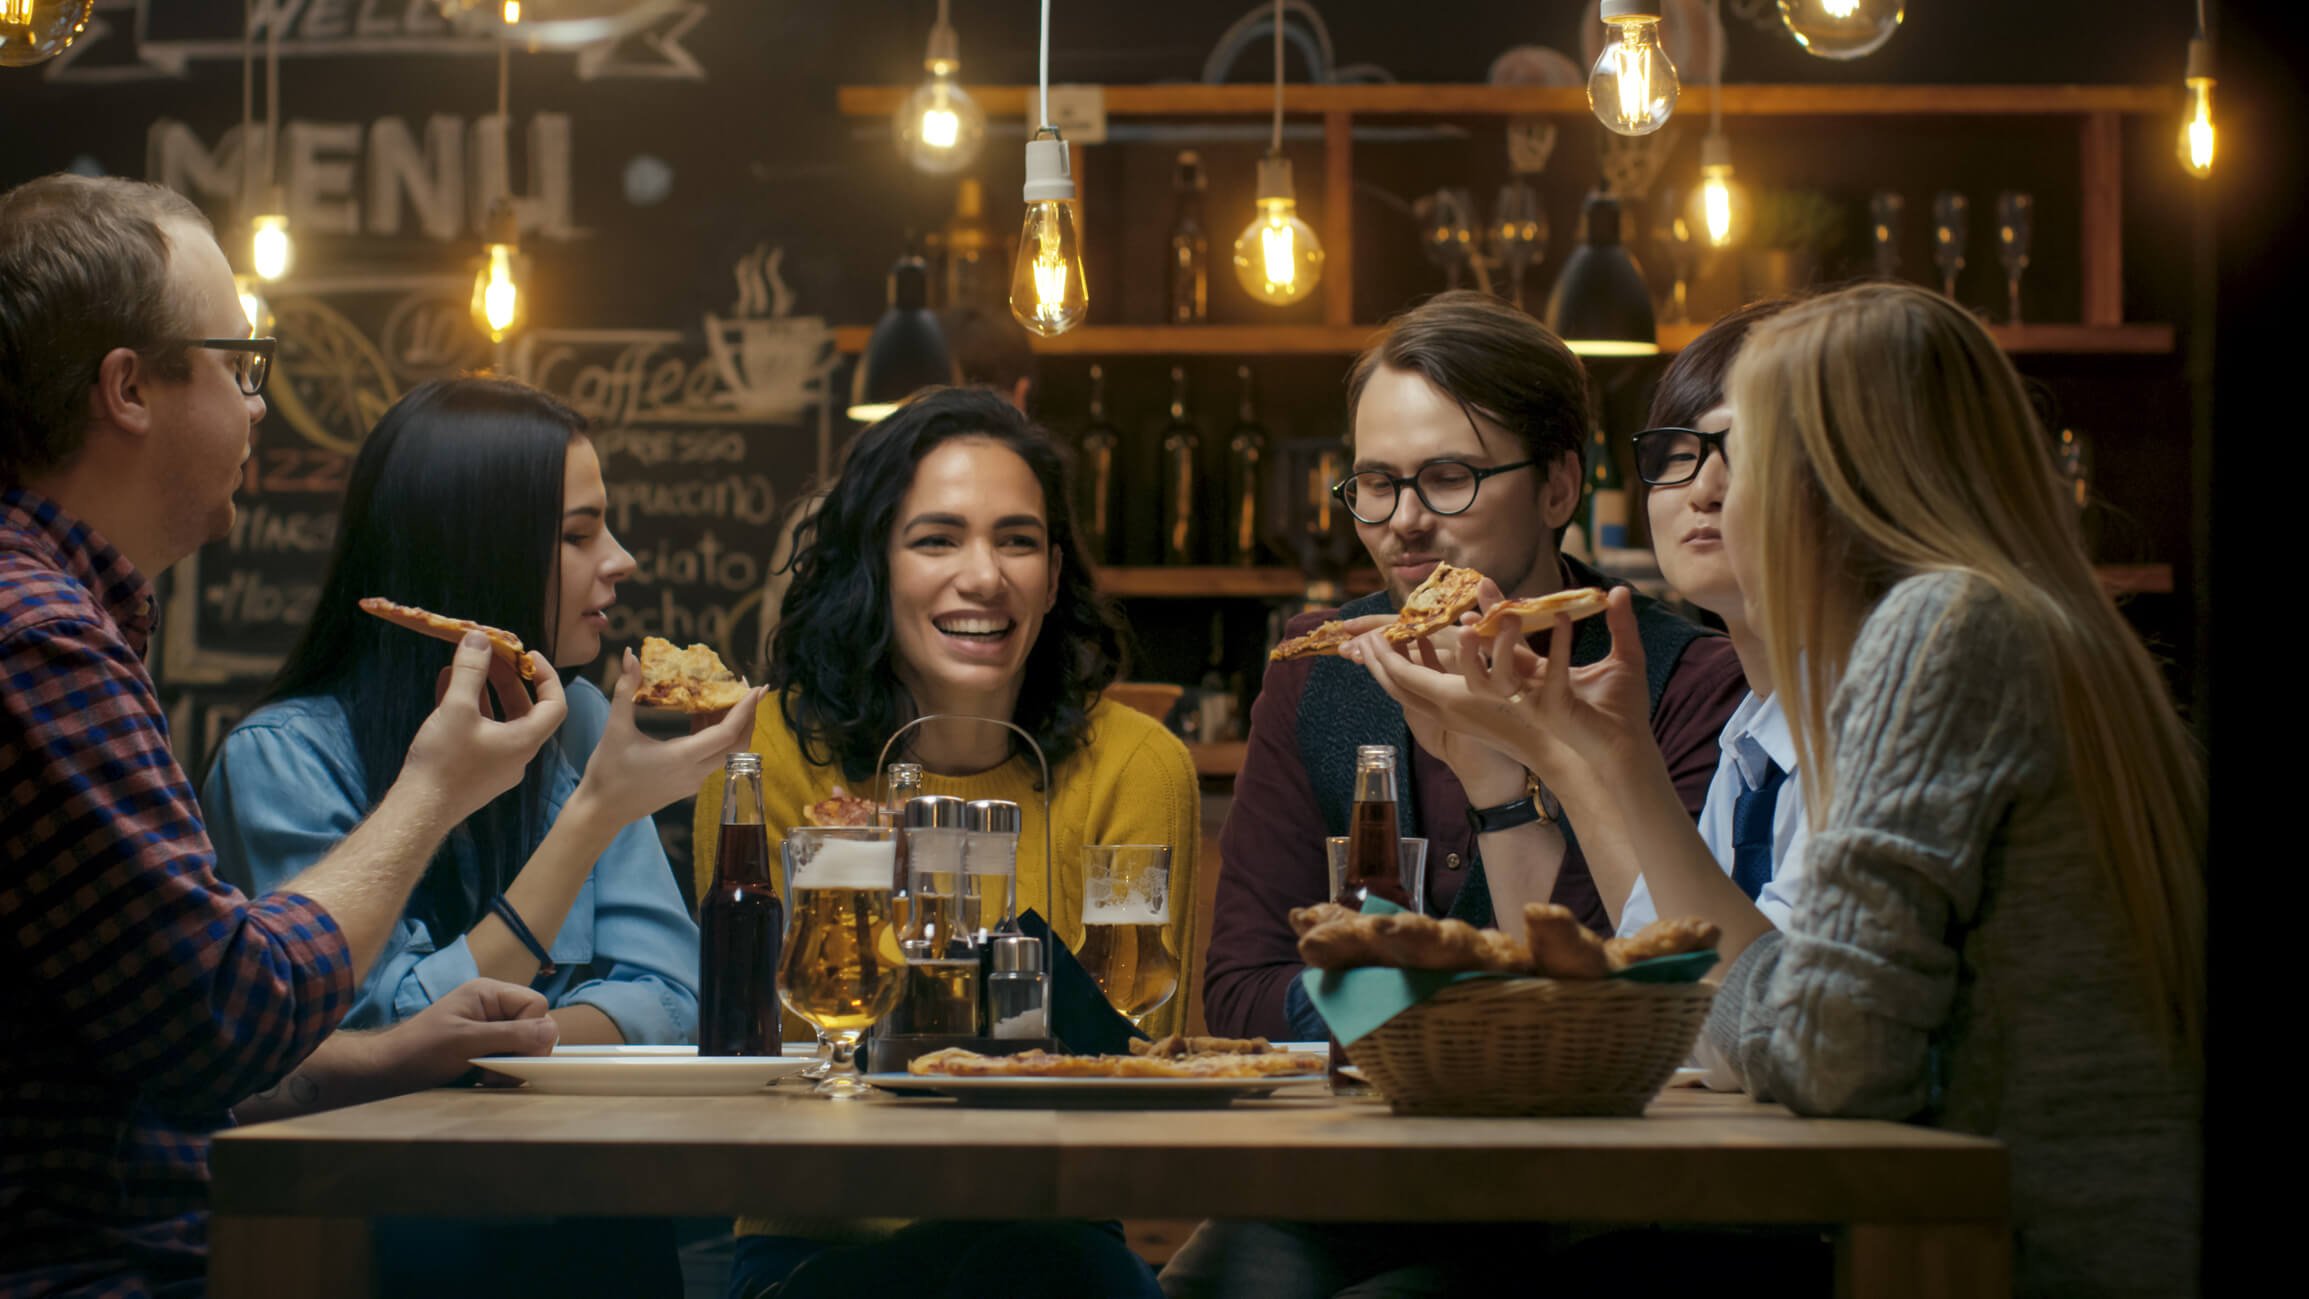 Group of happy diverse young people eat pizza at a restaurant